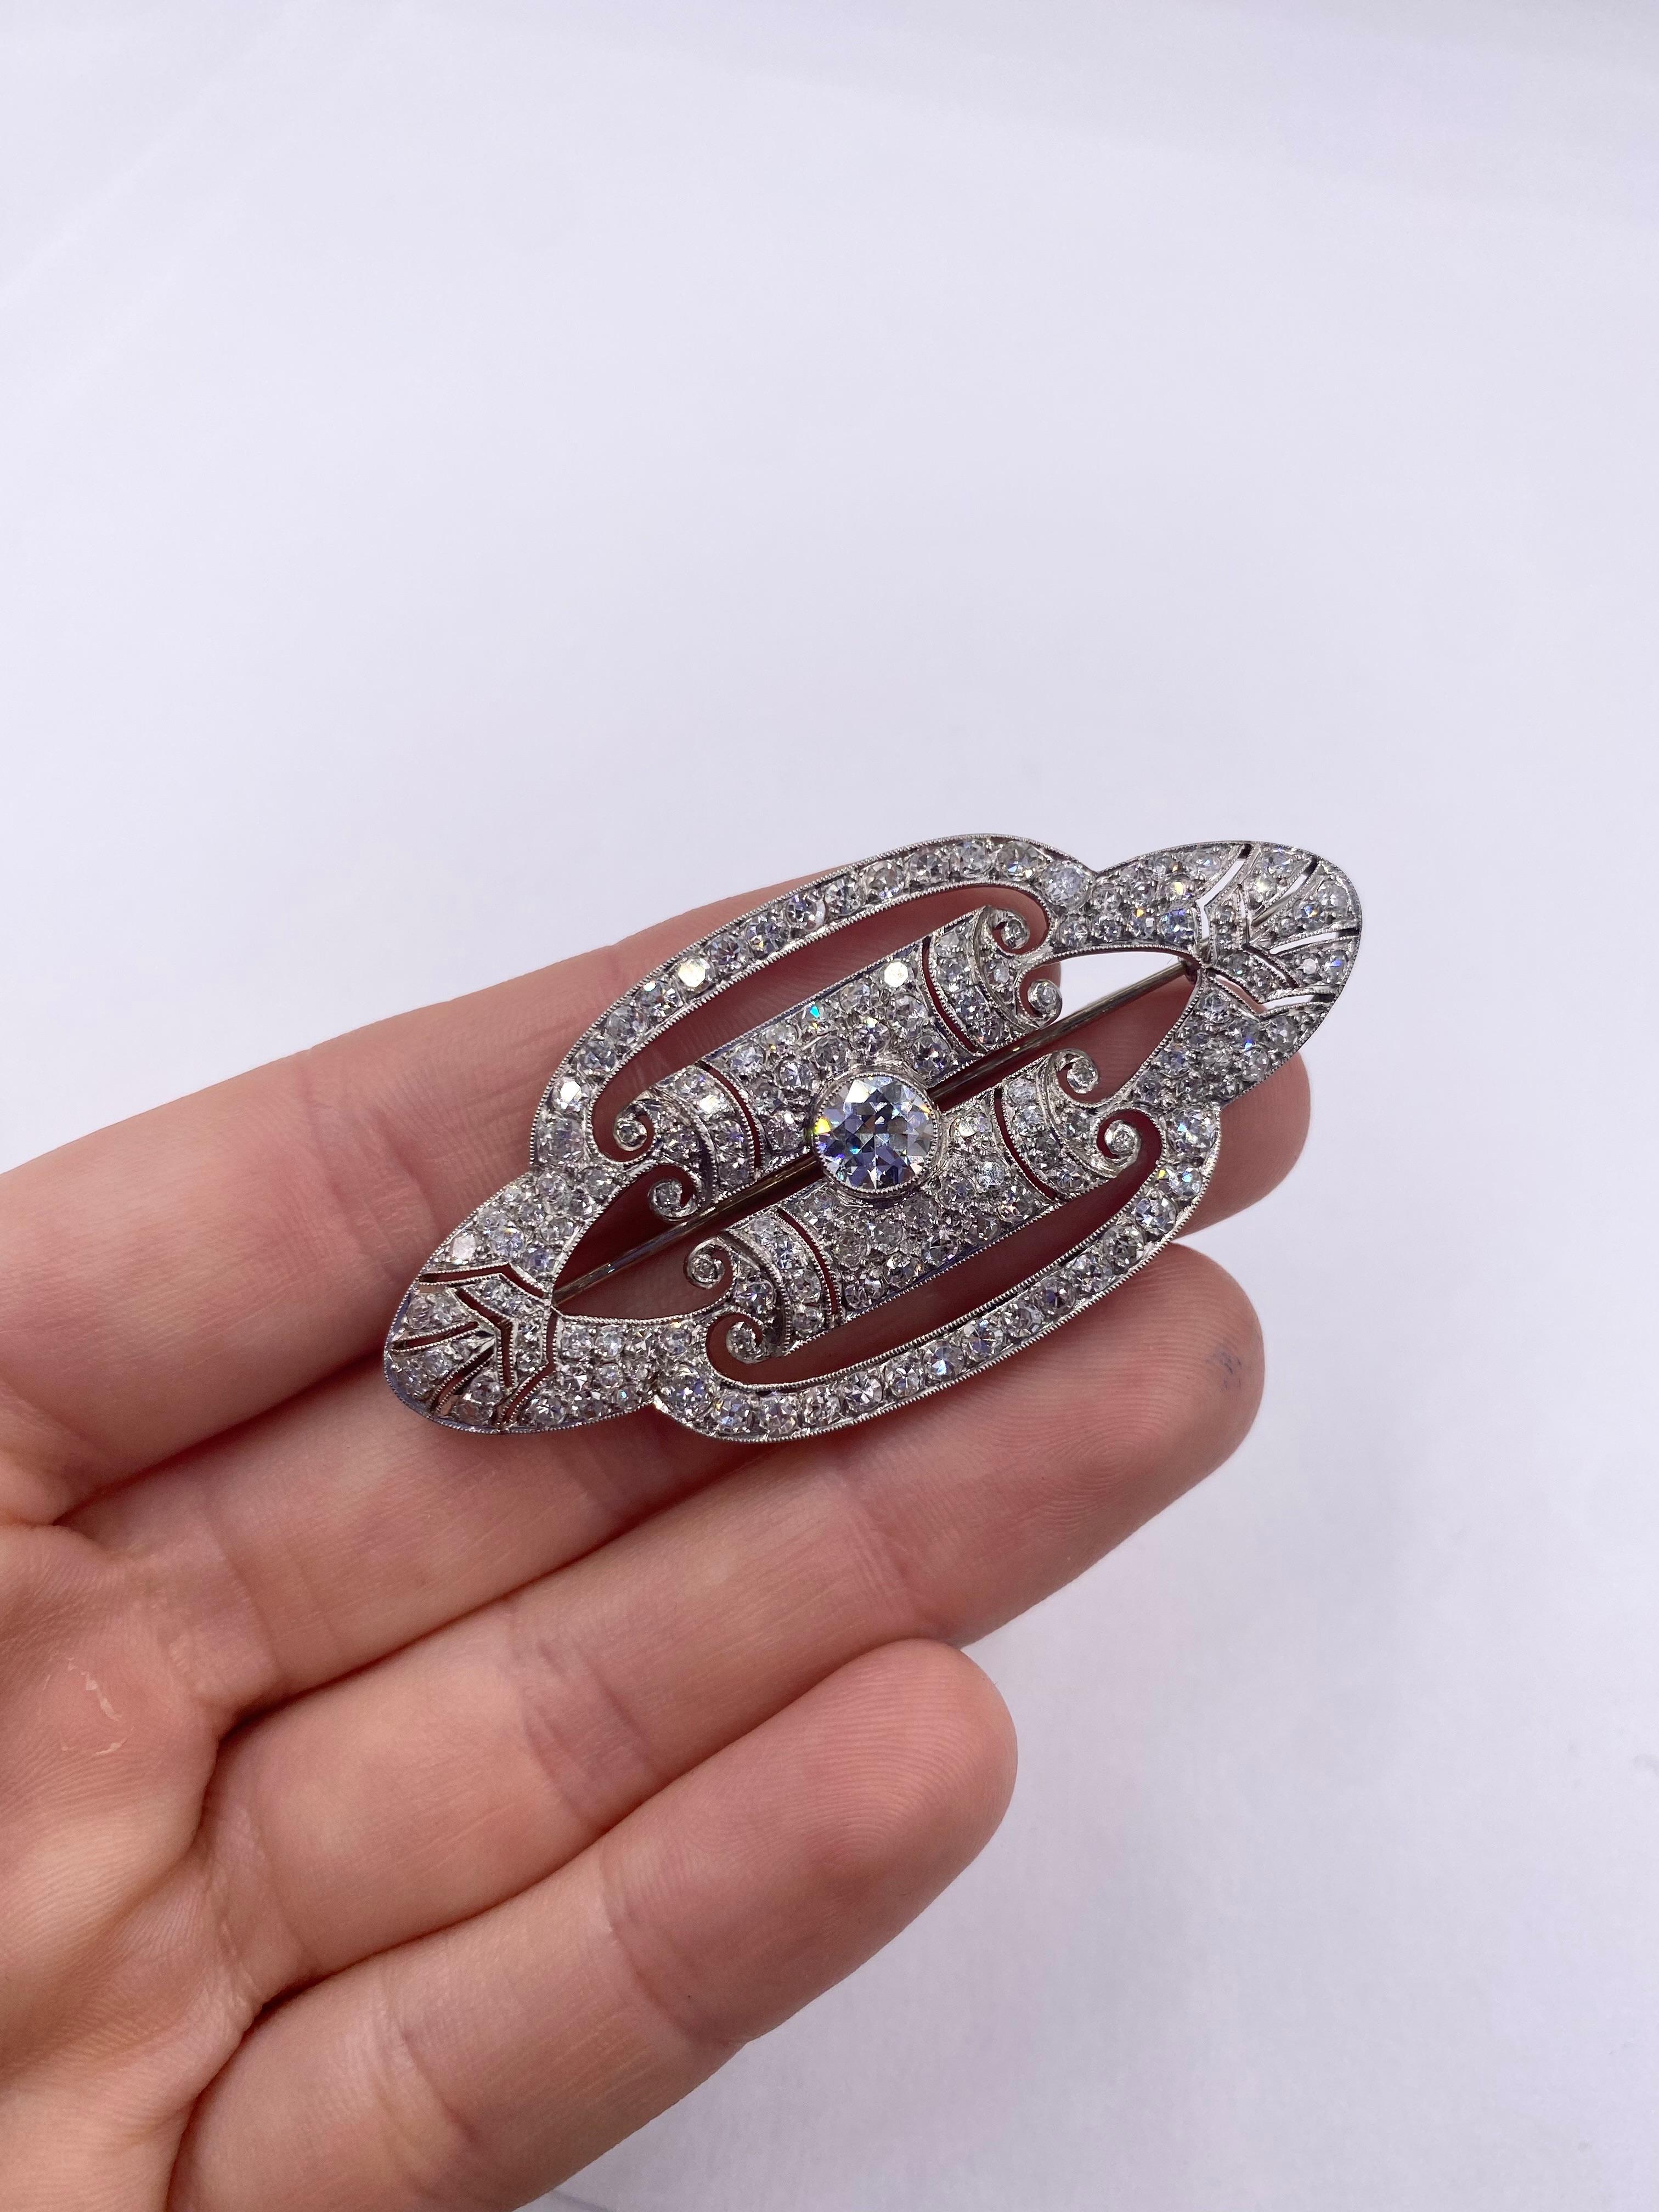 French Art Deco Diamond Brooch, circa 1920 In Excellent Condition For Sale In Uccle, BE